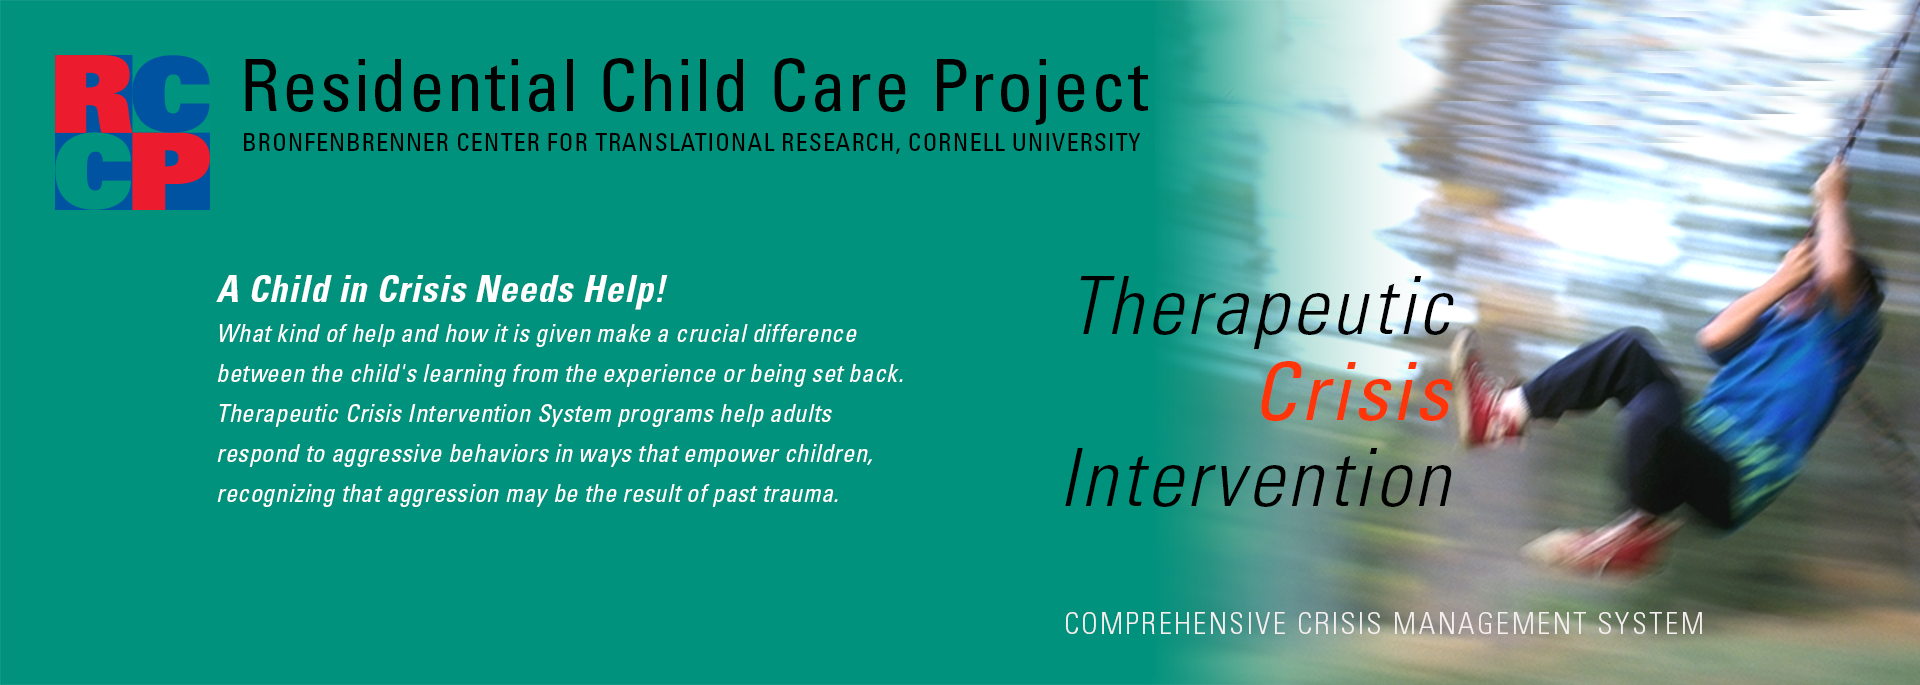 Therapeutic Crisis Intervention Overview